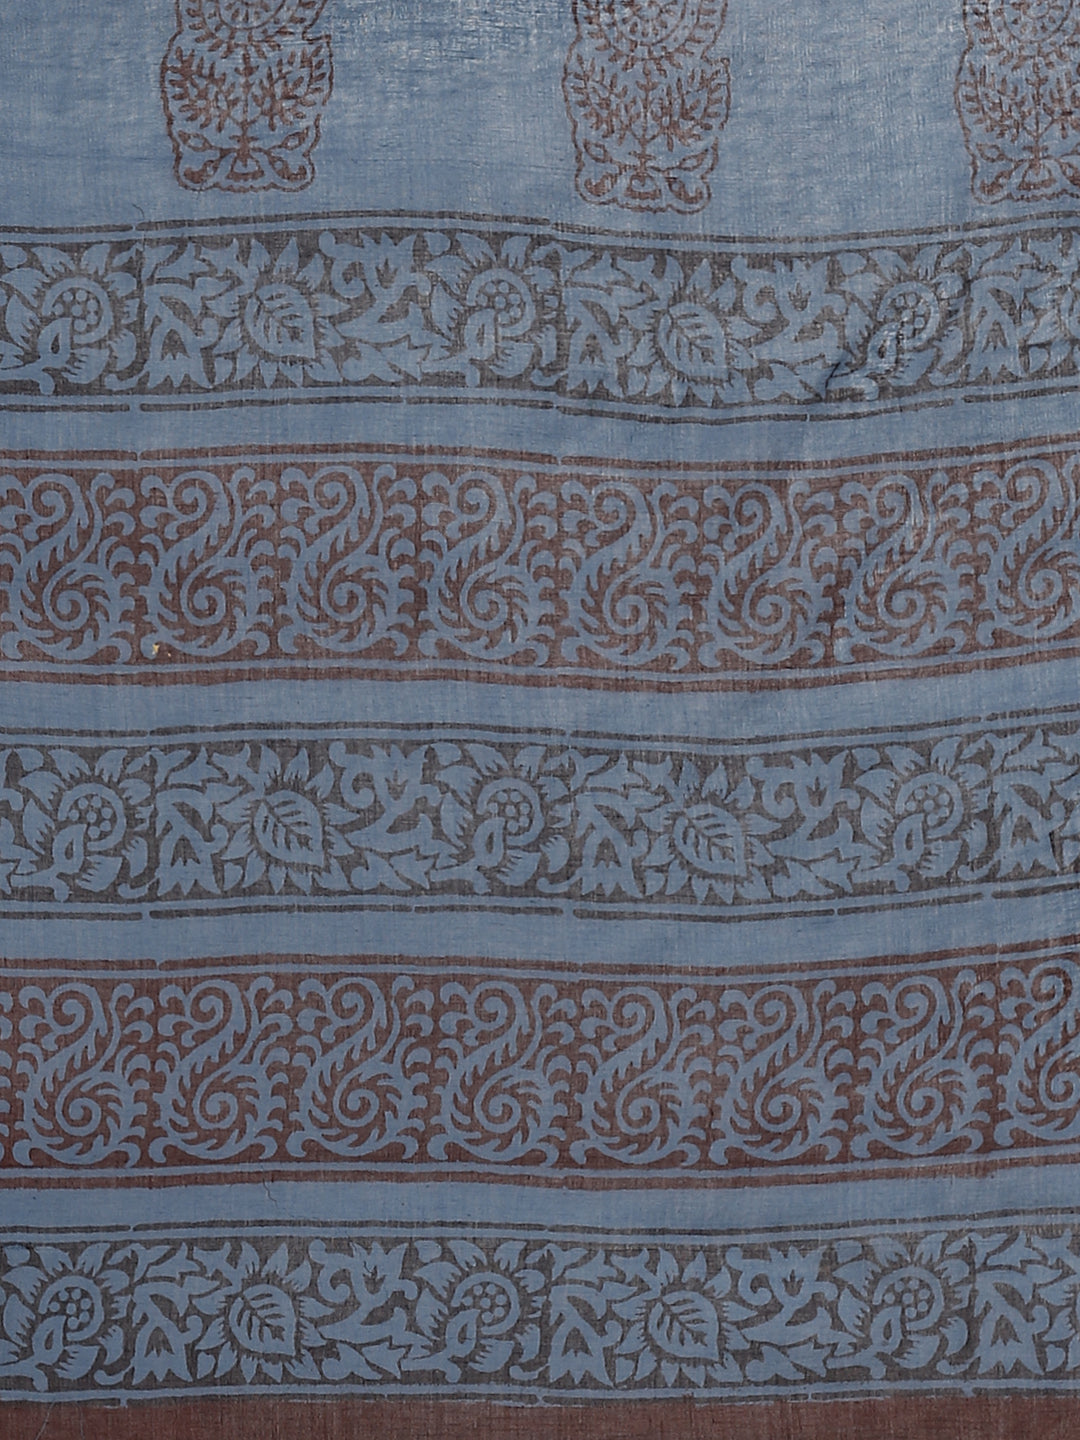 Blue and Brown, Kalakari India Pure Cotton Hand Block Printed Saree and Blouse BAPASA0092-Saree-Kalakari India-BAPASA0092-Block Print, Cotton, Geographical Indication, Hand Crafted, Heritage Prints, Natural Dyes, Red, Sarees, Sustainable Fabrics, Woven, Yellow-[Linen,Ethnic,wear,Fashionista,Handloom,Handicraft,Indigo,blockprint,block,print,Cotton,Chanderi,Blue, latest,classy,party,bollywood,trendy,summer,style,traditional,formal,elegant,unique,style,hand,block,print, dabu,booti,gift,present,glam